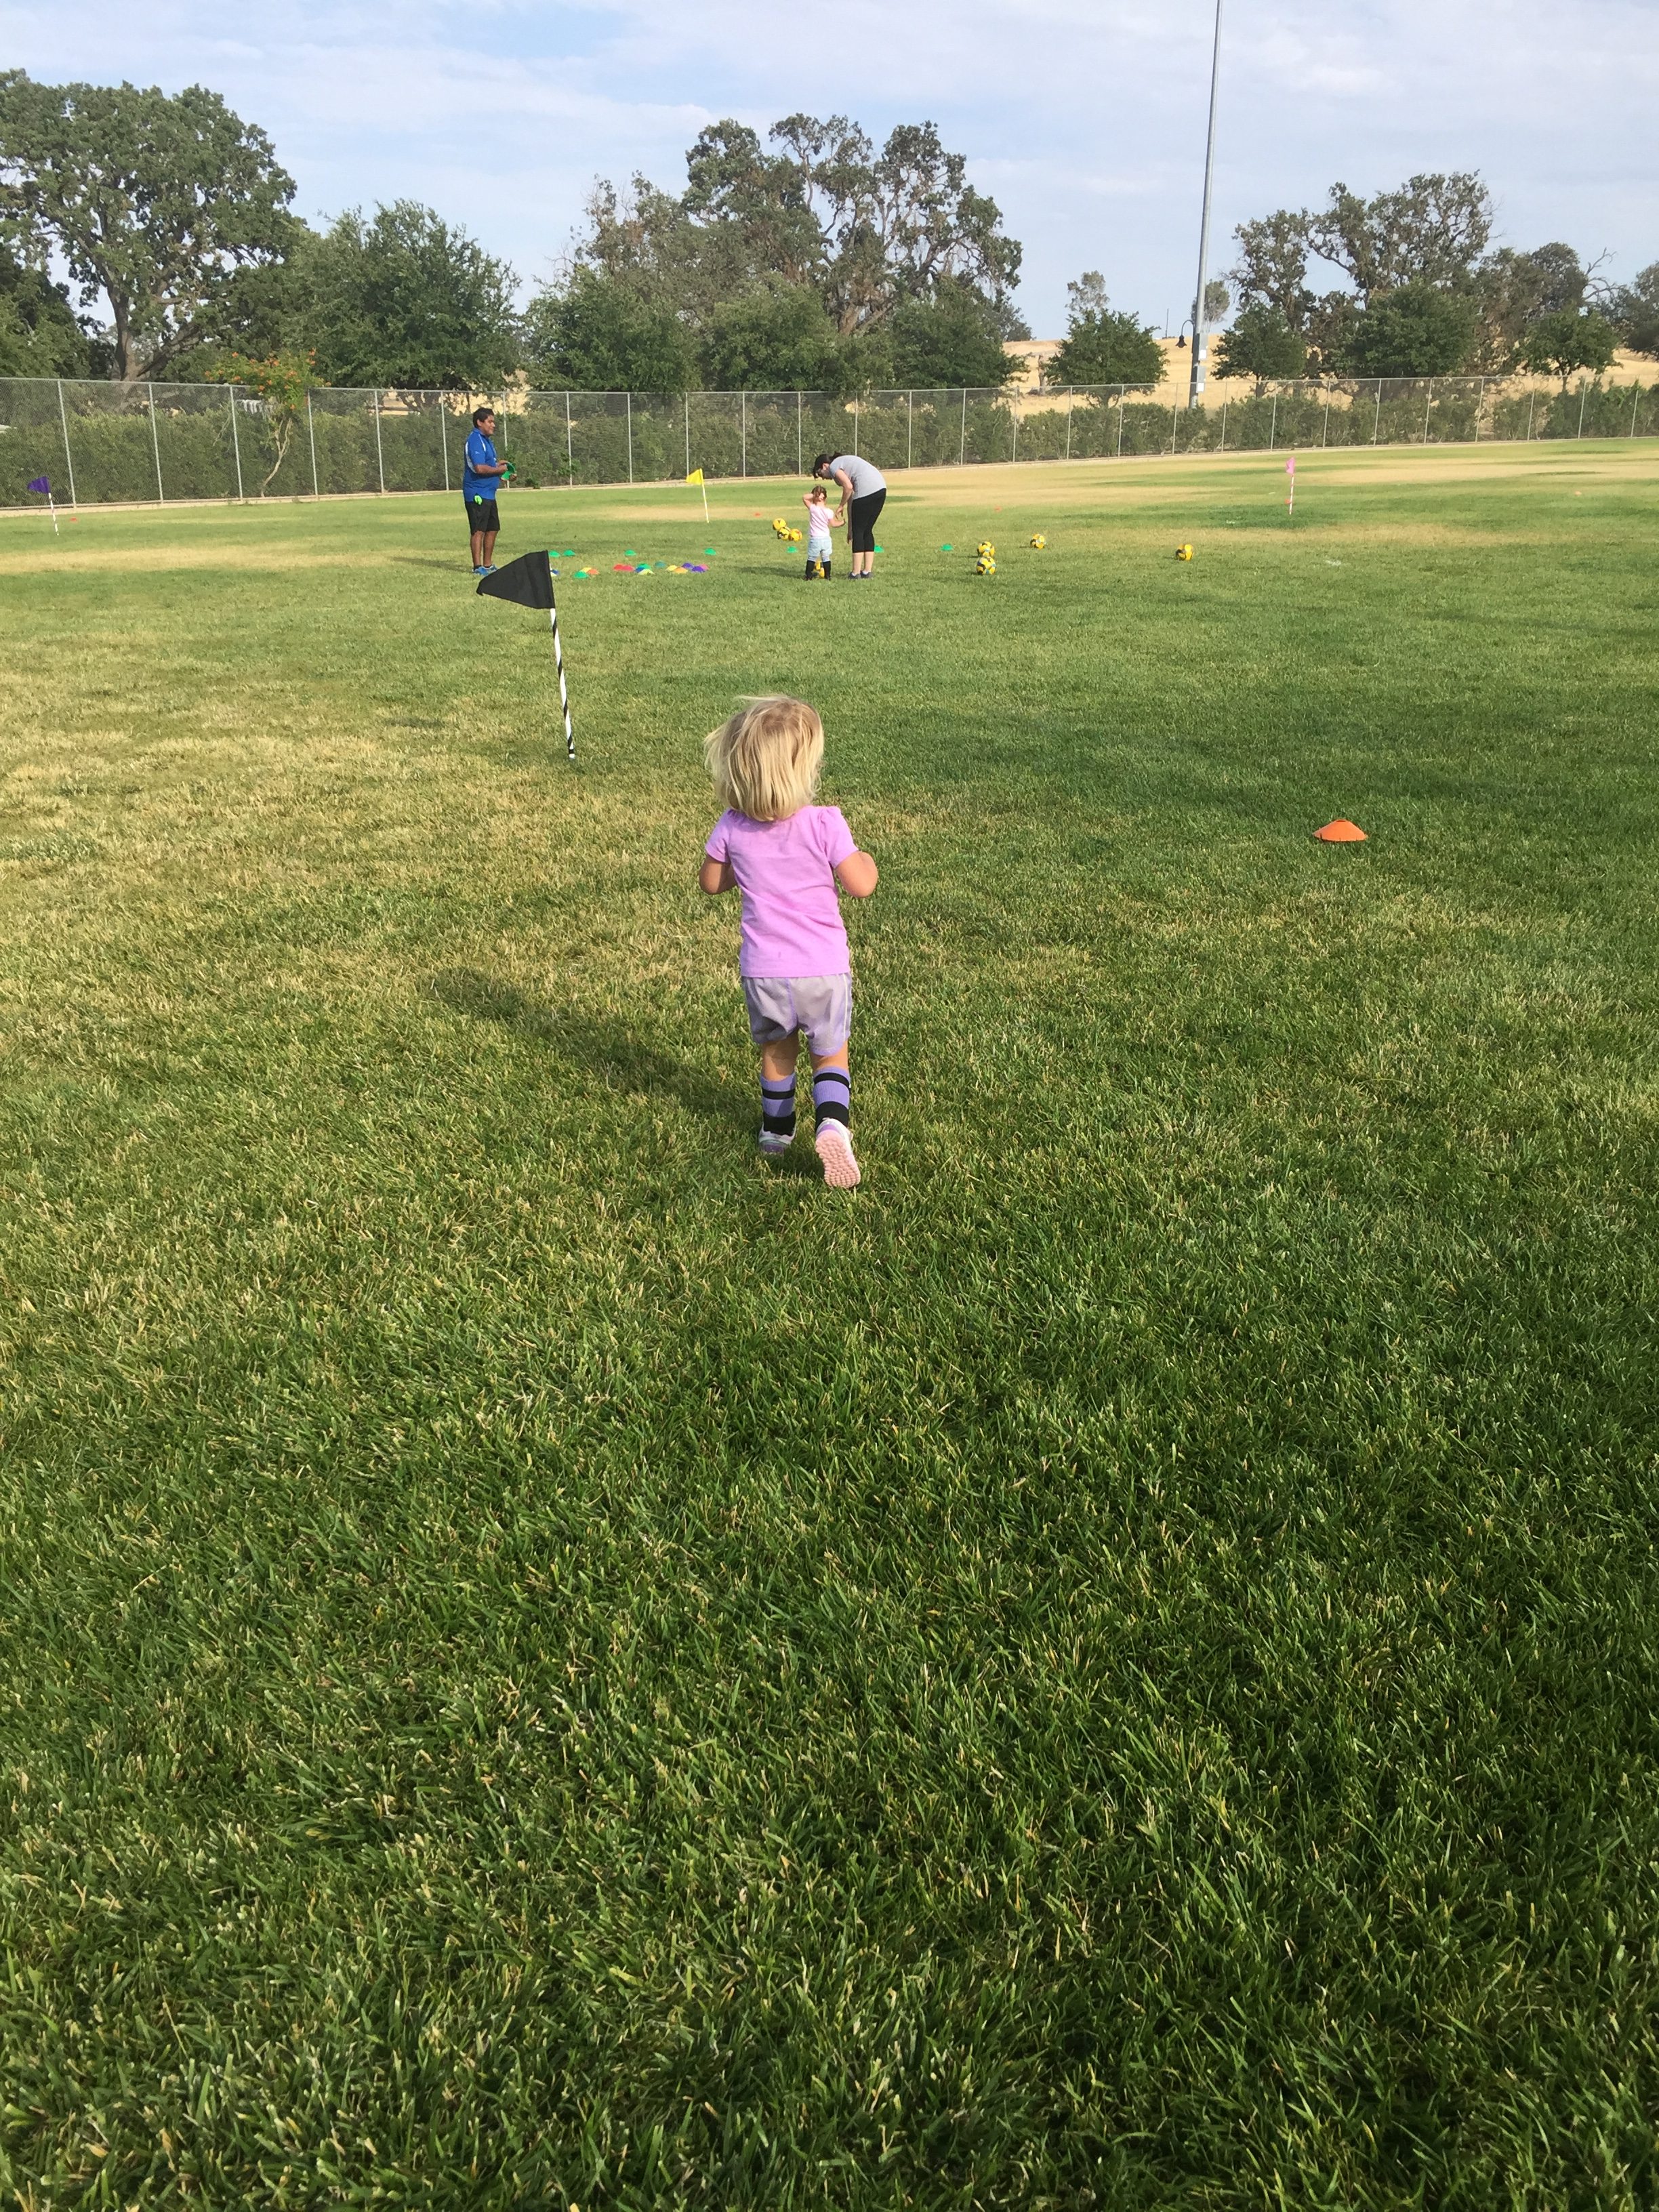 Running in the field at Kidz Love Soccer class in Paso Robles California